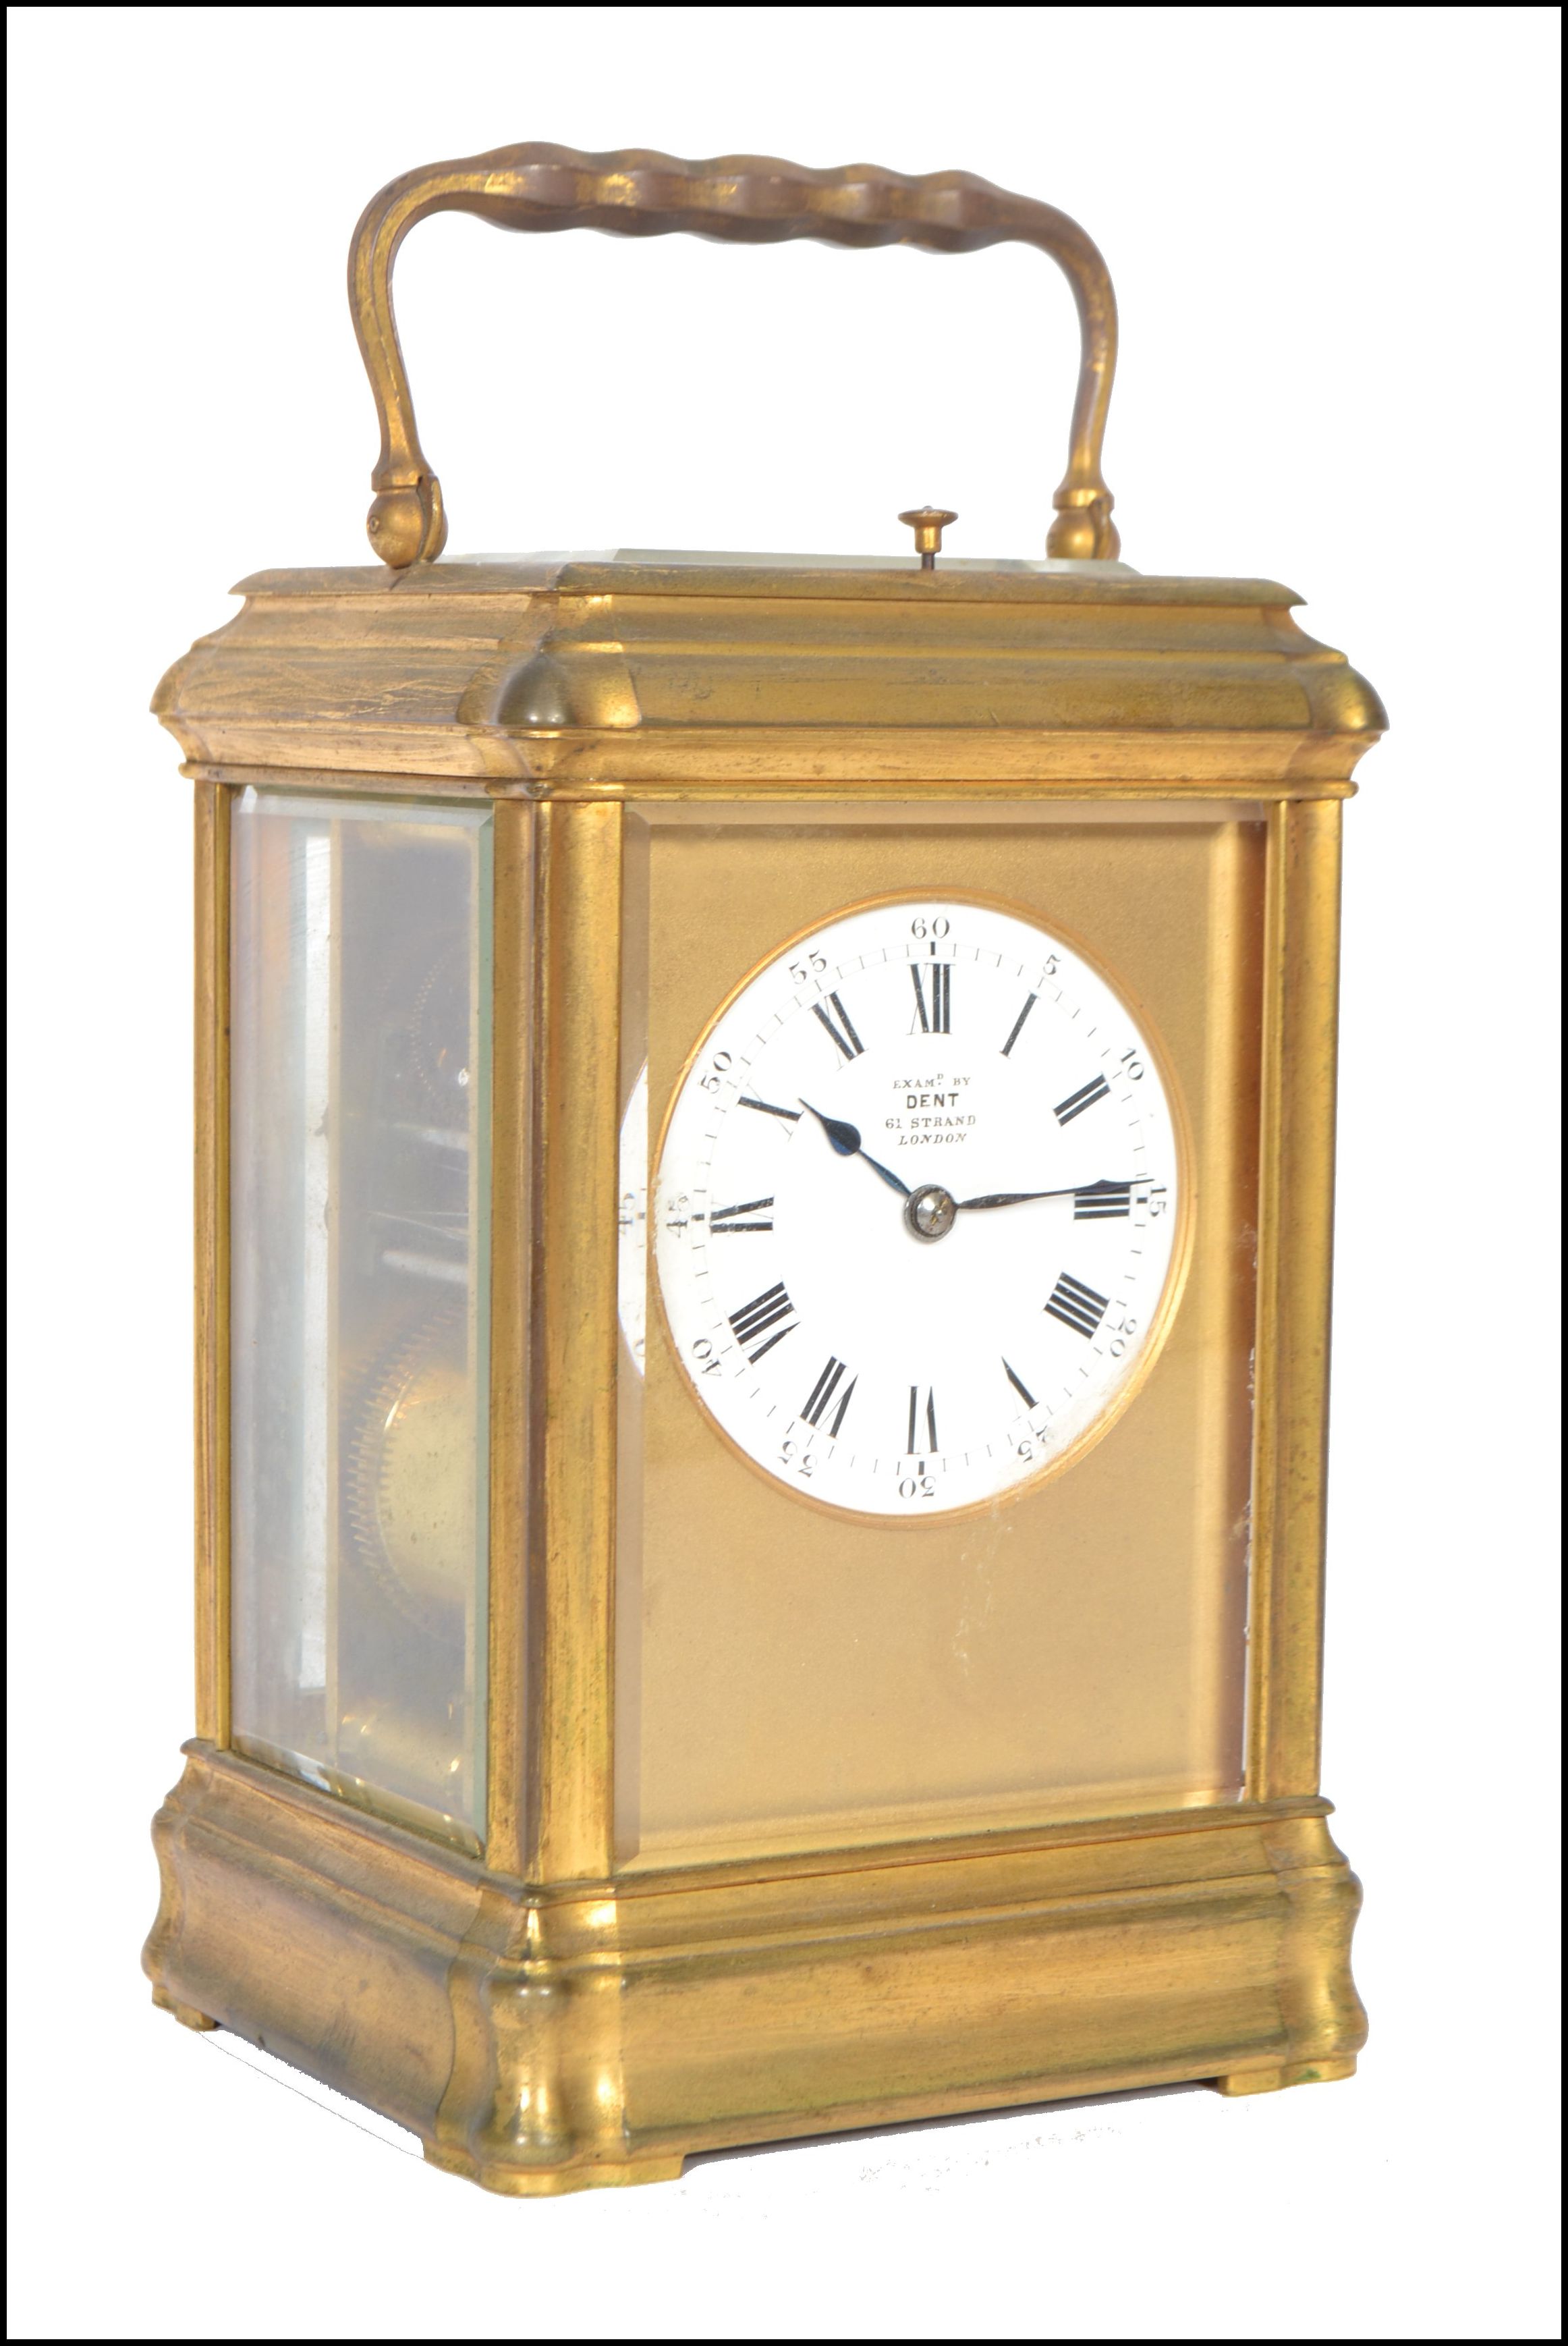 A large 19th century Dent of 61 Strand, London gilt brass framed French carriage clock.  The case